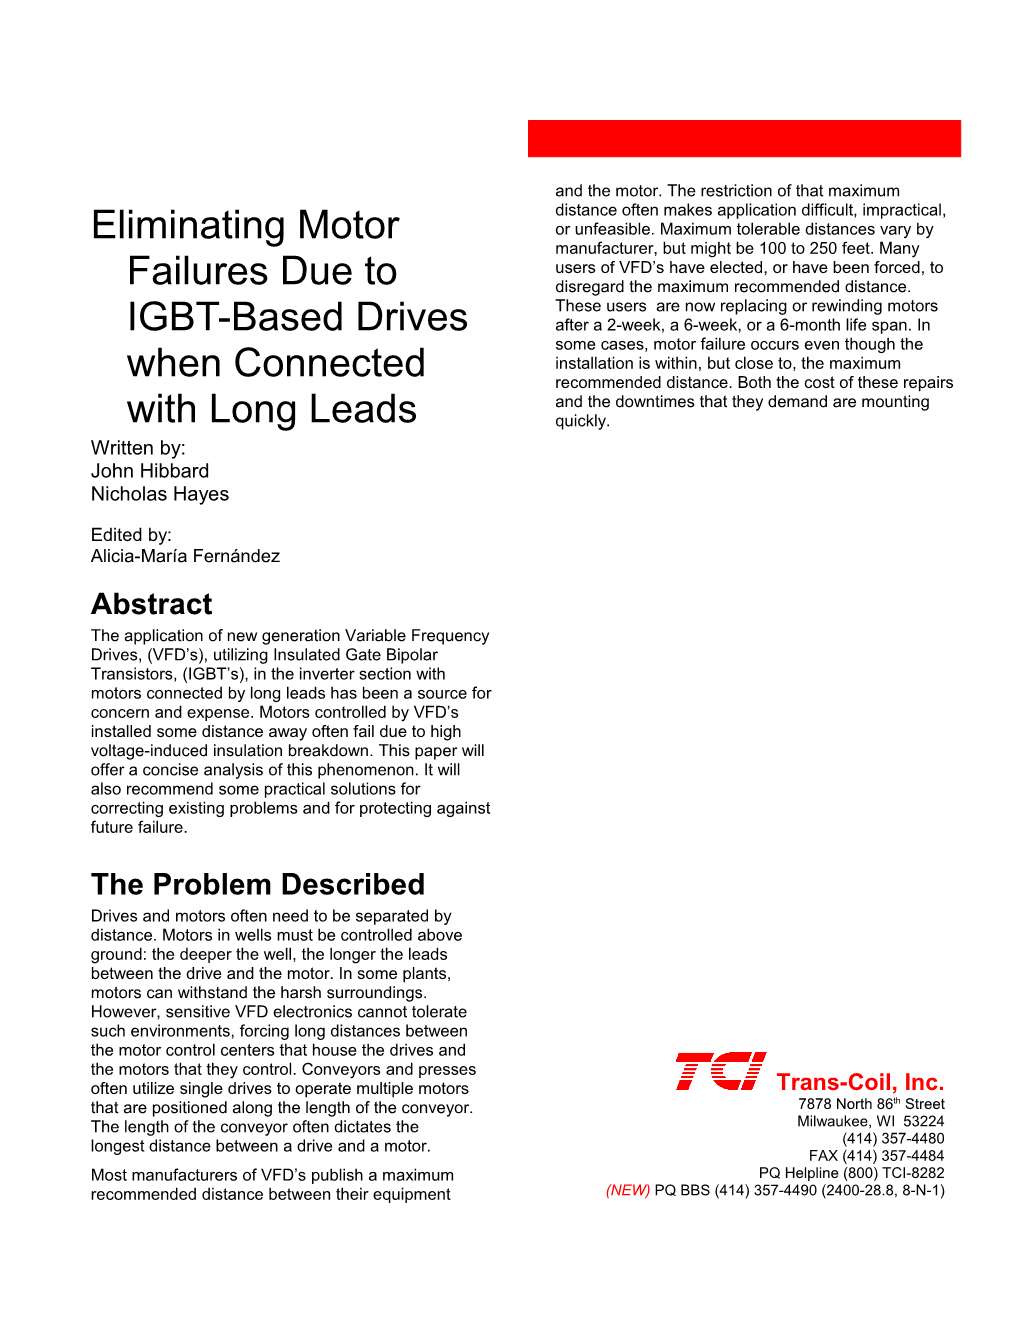 Eliminating Motor Failures Due to IGBT-Based Drives Connected with Long Leads